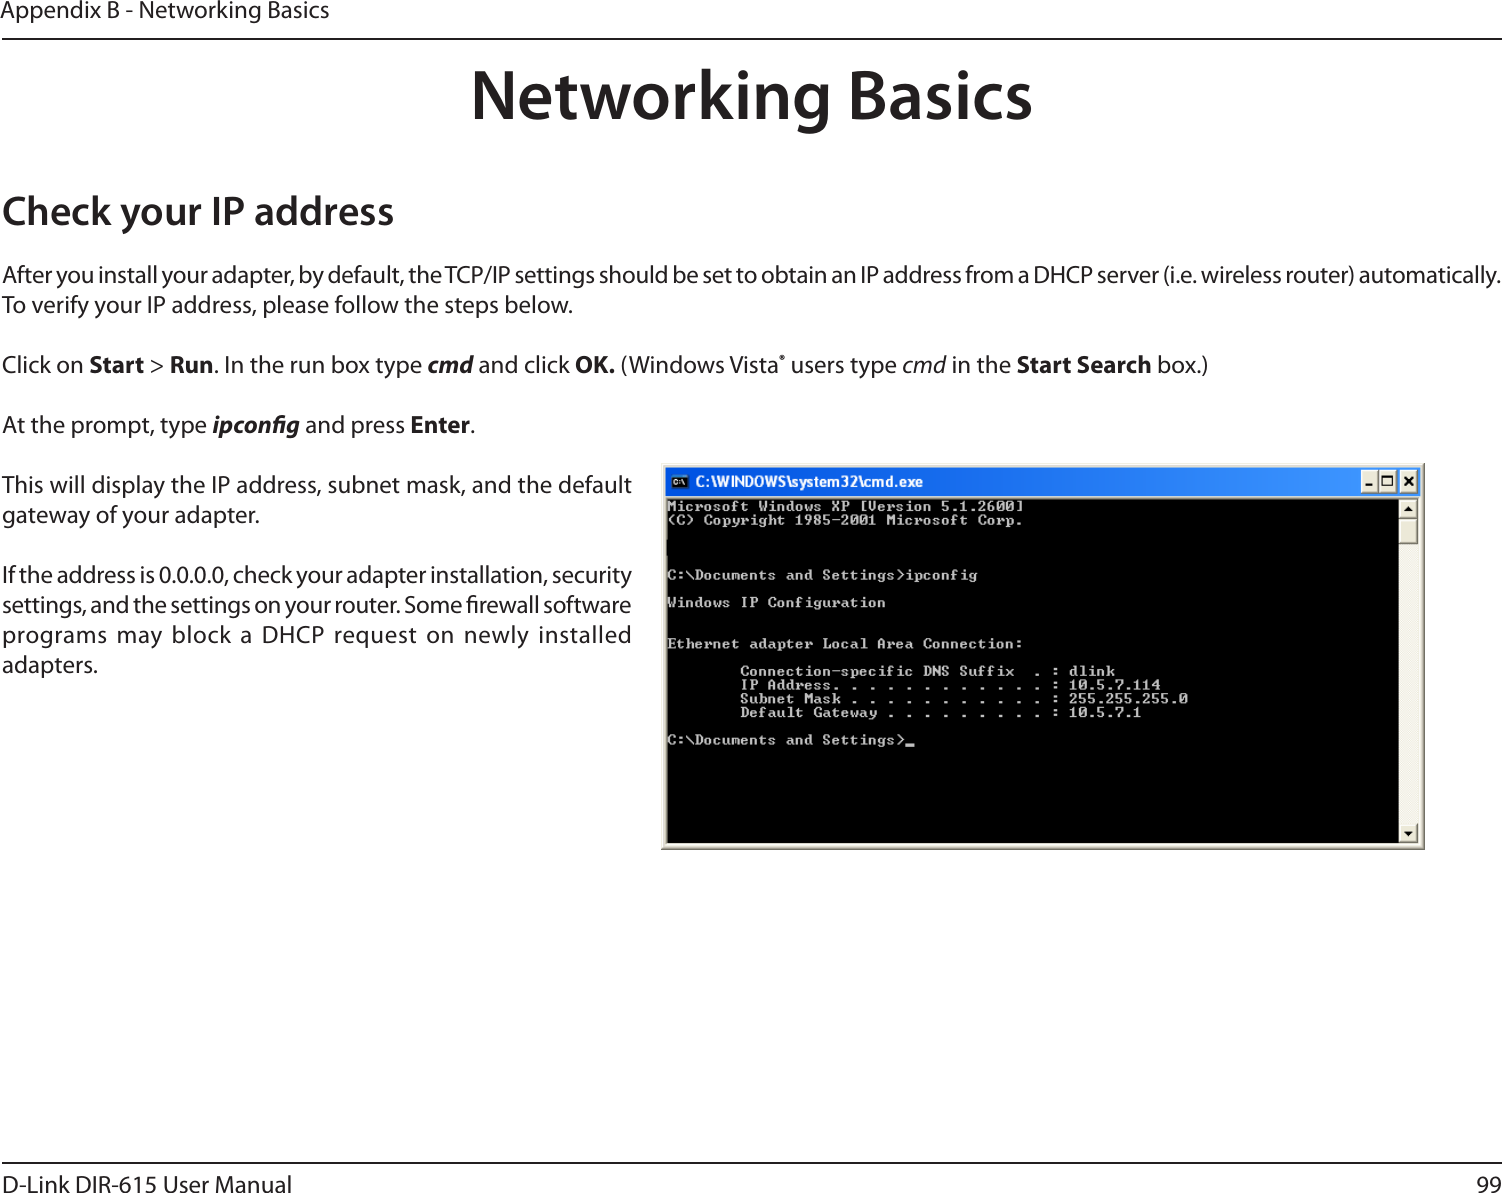 99D-Link DIR-615 User ManualAppendix B - Networking BasicsNetworking BasicsCheck your IP addressAfter you install your adapter, by default, the TCP/IP settings should be set to obtain an IP address from a DHCP server (i.e. wireless router) automatically. To verify your IP address, please follow the steps below.Click on Start &gt; Run. In the run box type cmd and click OK. (Windows Vista® users type cmd in the Start Search box.)At the prompt, type ipcong and press Enter.This will display the IP address, subnet mask, and the default gateway of your adapter.If the address is 0.0.0.0, check your adapter installation, security settings, and the settings on your router. Some rewall software programs may block a  DHCP request on newly installed adapters. 